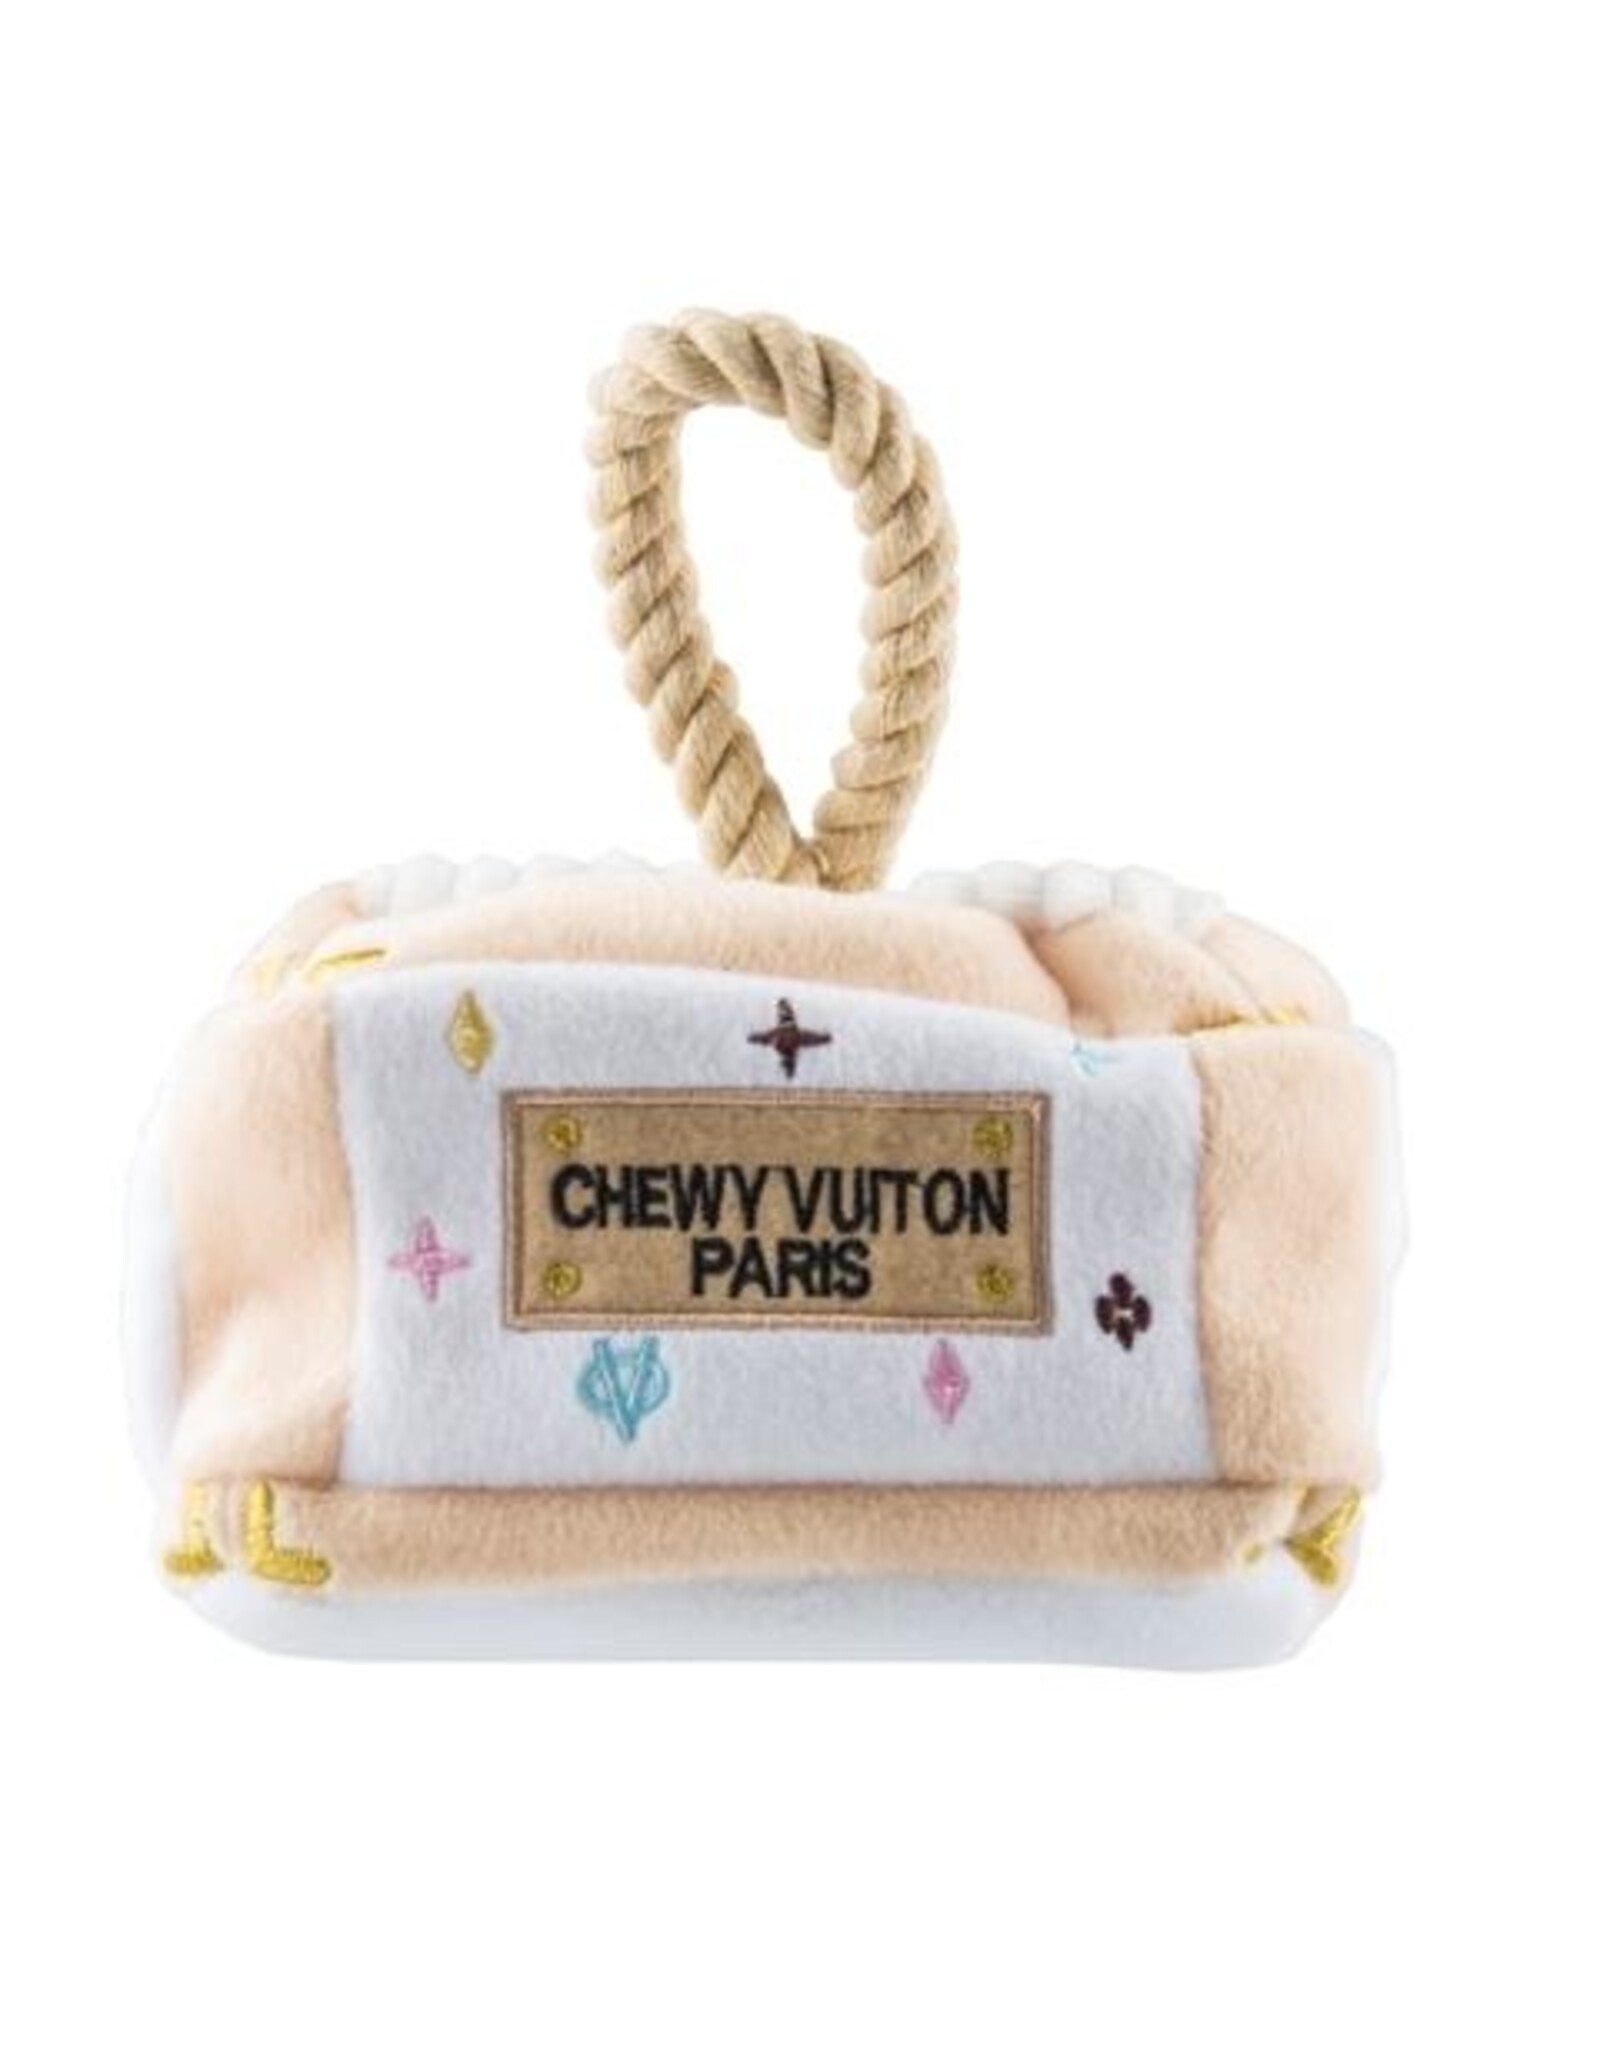 Haute Diggity Dog Interactive - Chewy Vuitton